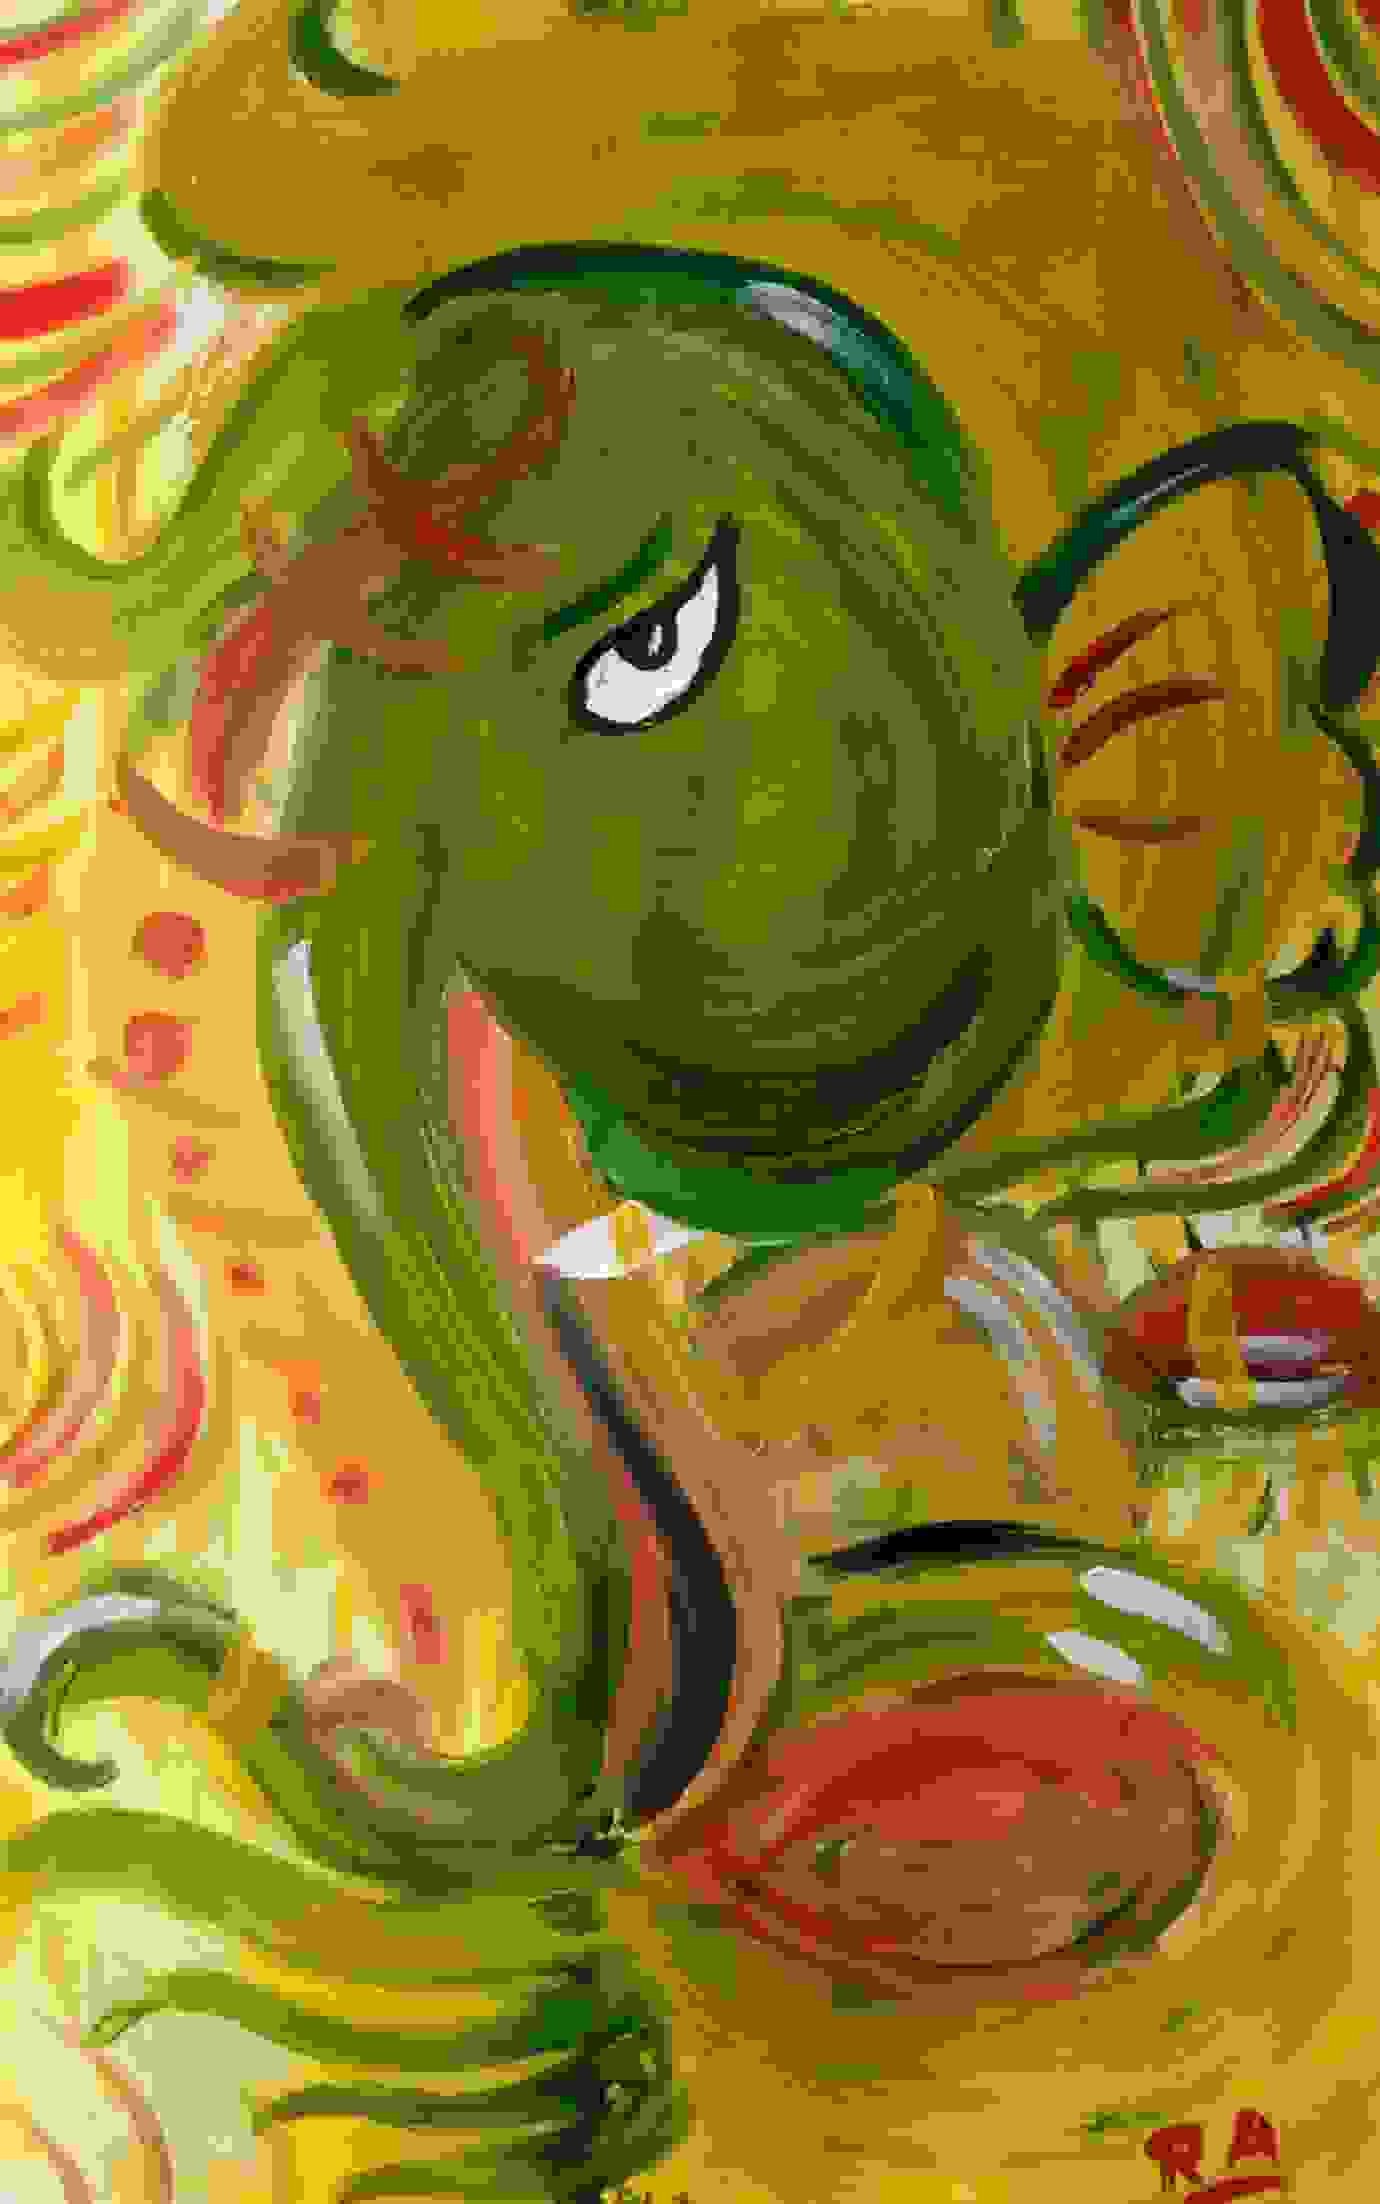 Painting Of Titel The Lord Ganesha In Oil Painting Size 1420cm Sq Cm P